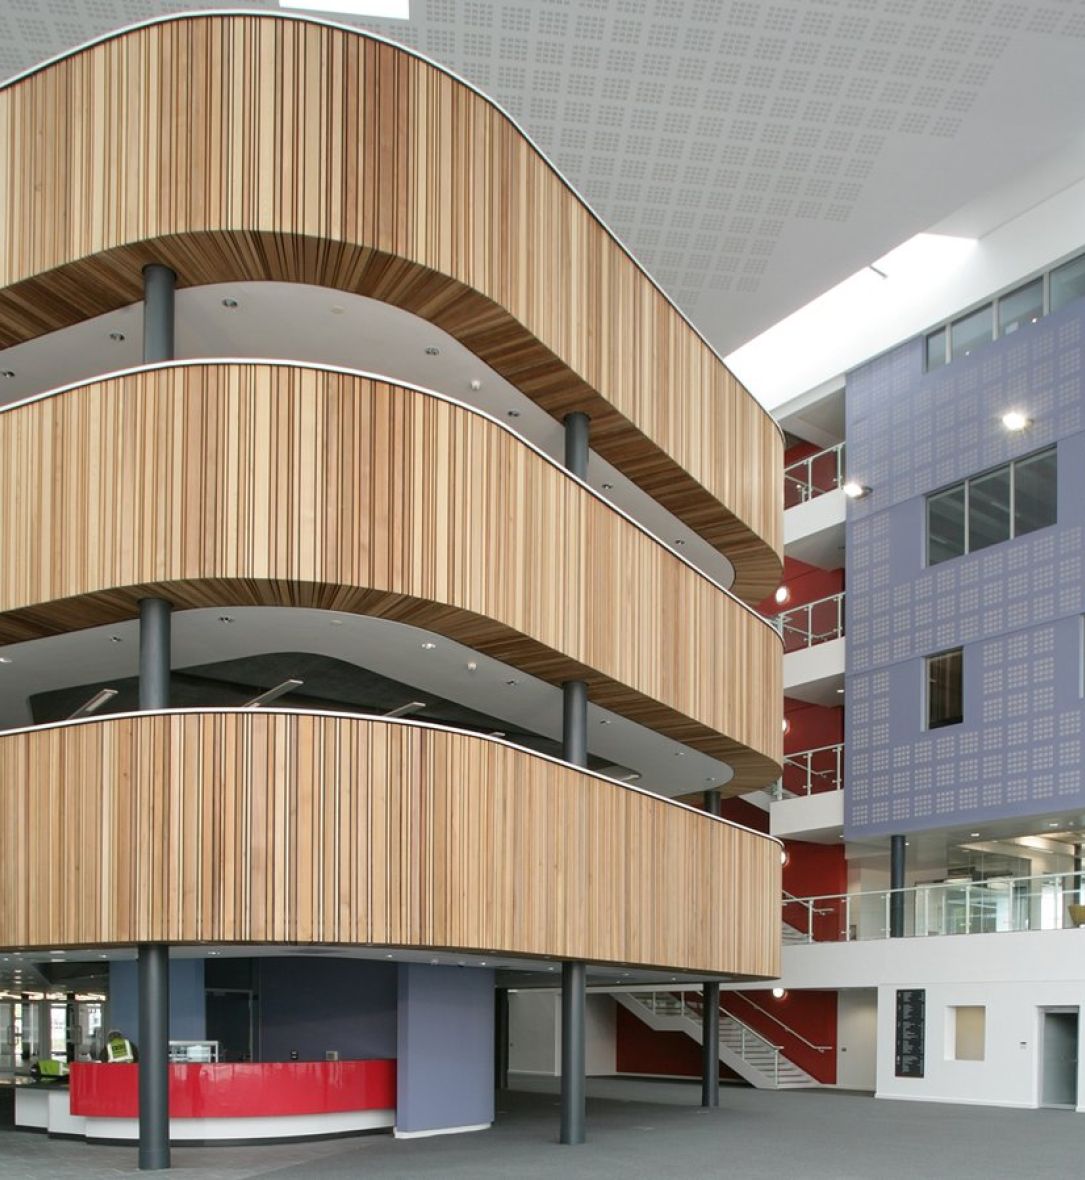 Internal timber Wall Panels at Walsall College of Arts & Technology